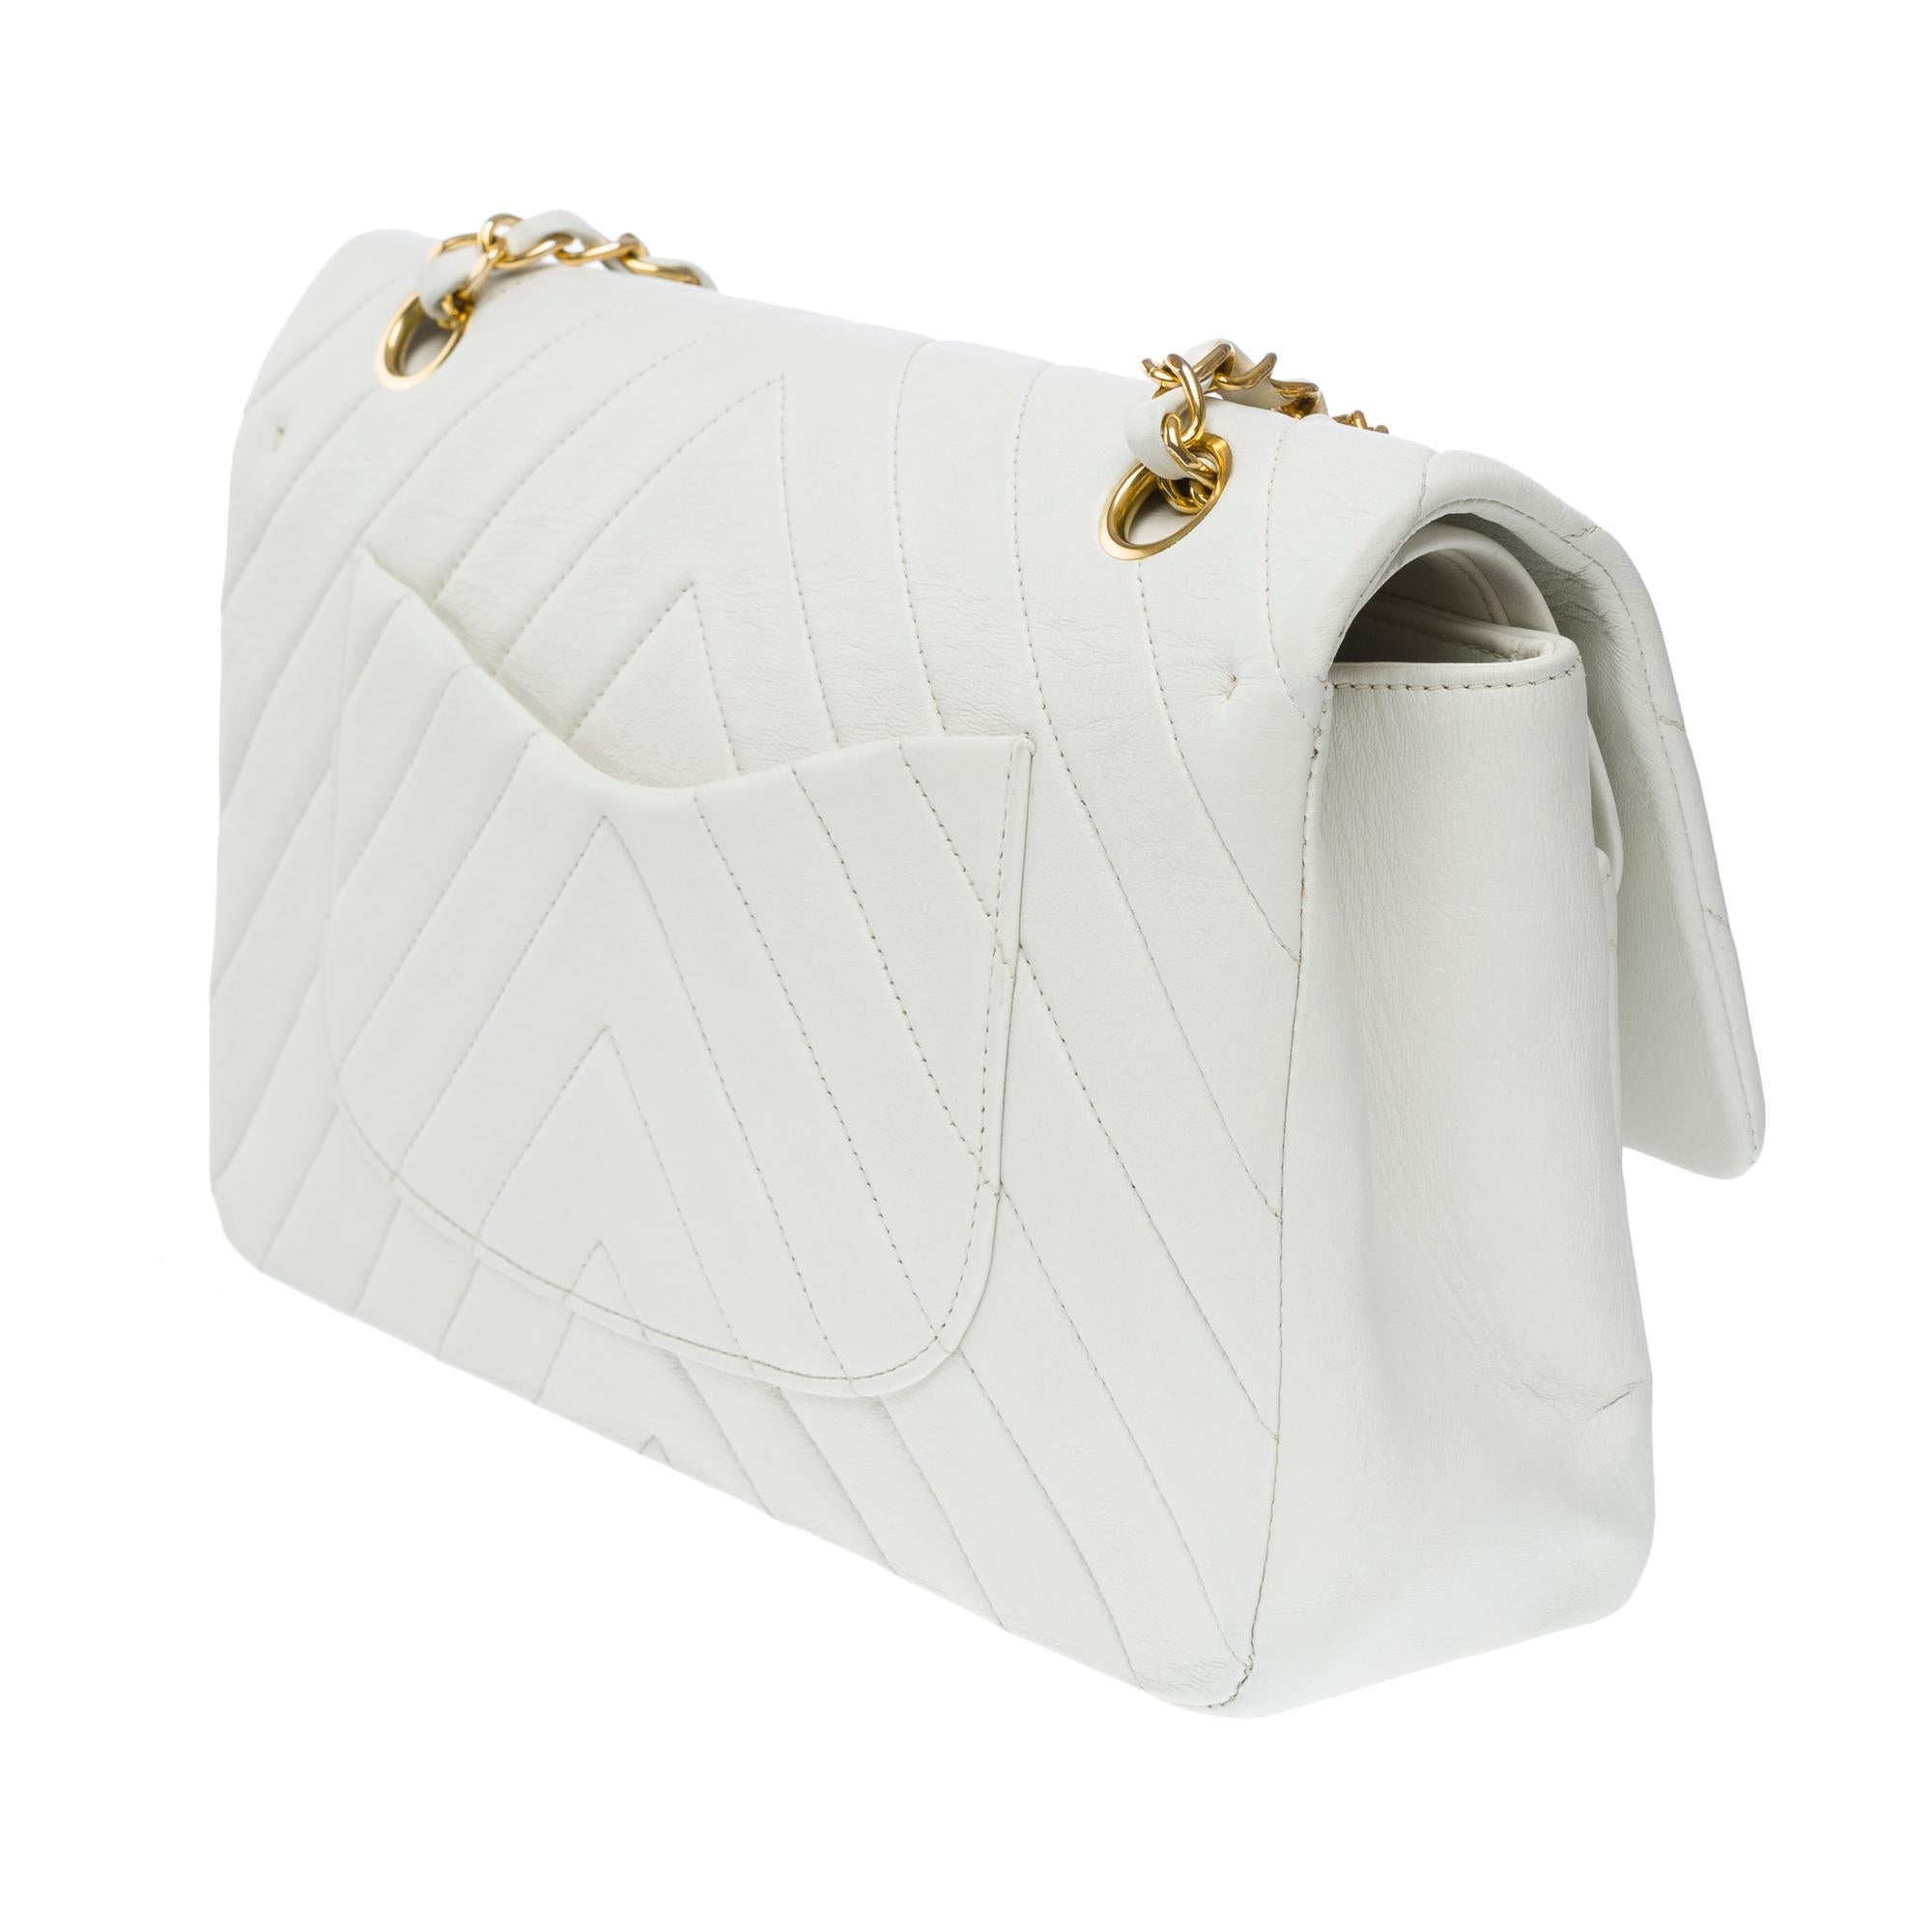 Chanel Timeless double flap shoulder bag in white herringbone quilted lamb, GHW 1